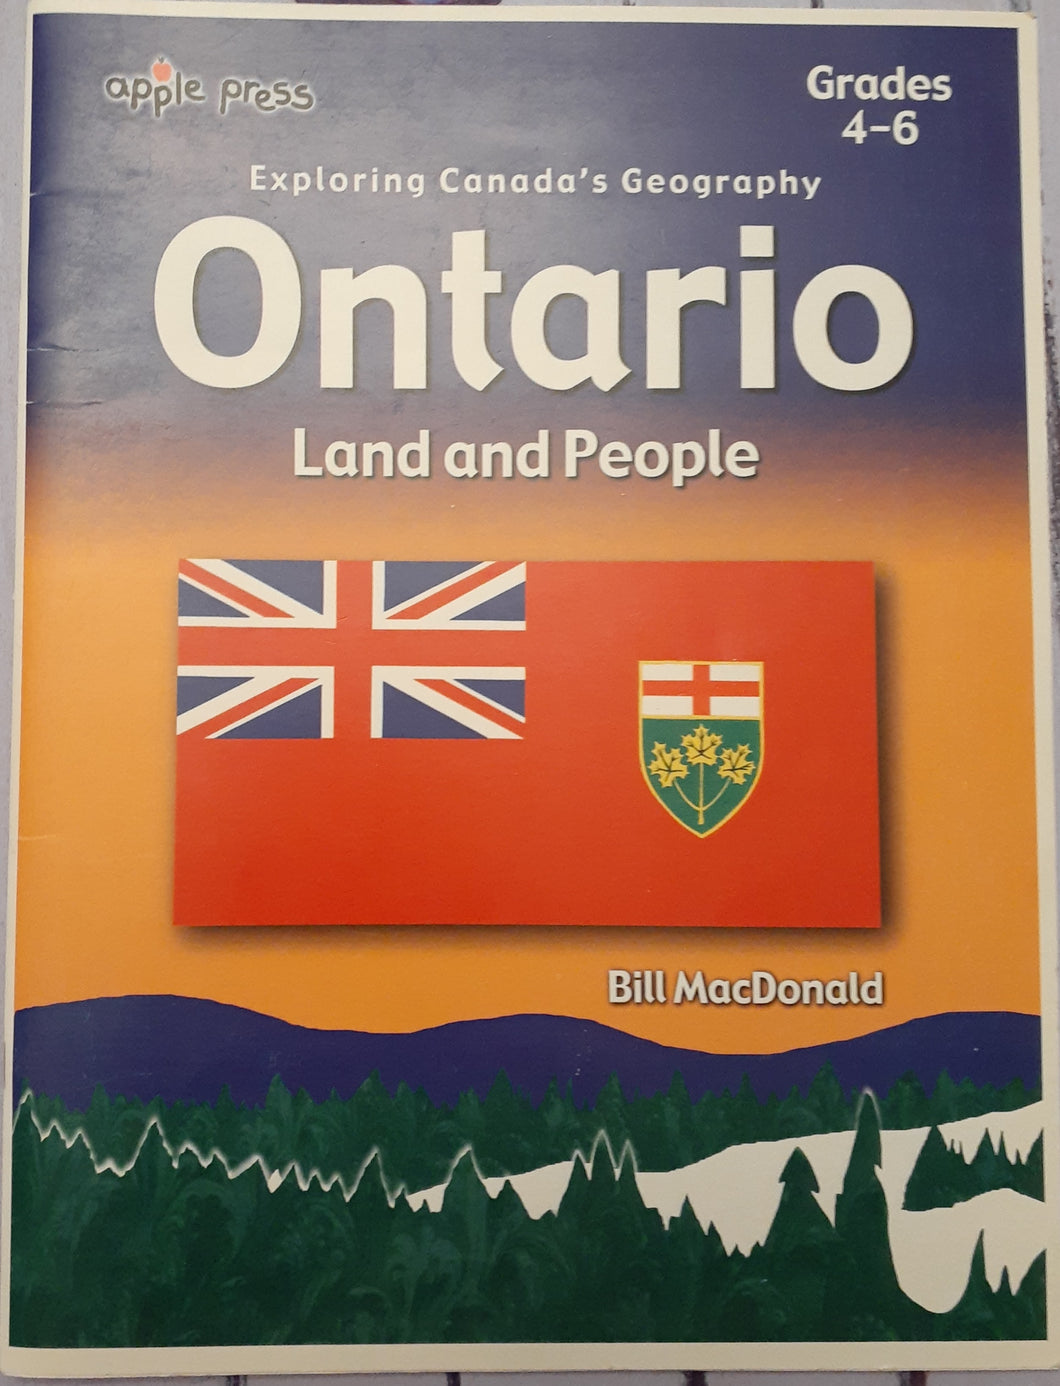 Exploring Canada's Geography - Ontario: Land and People